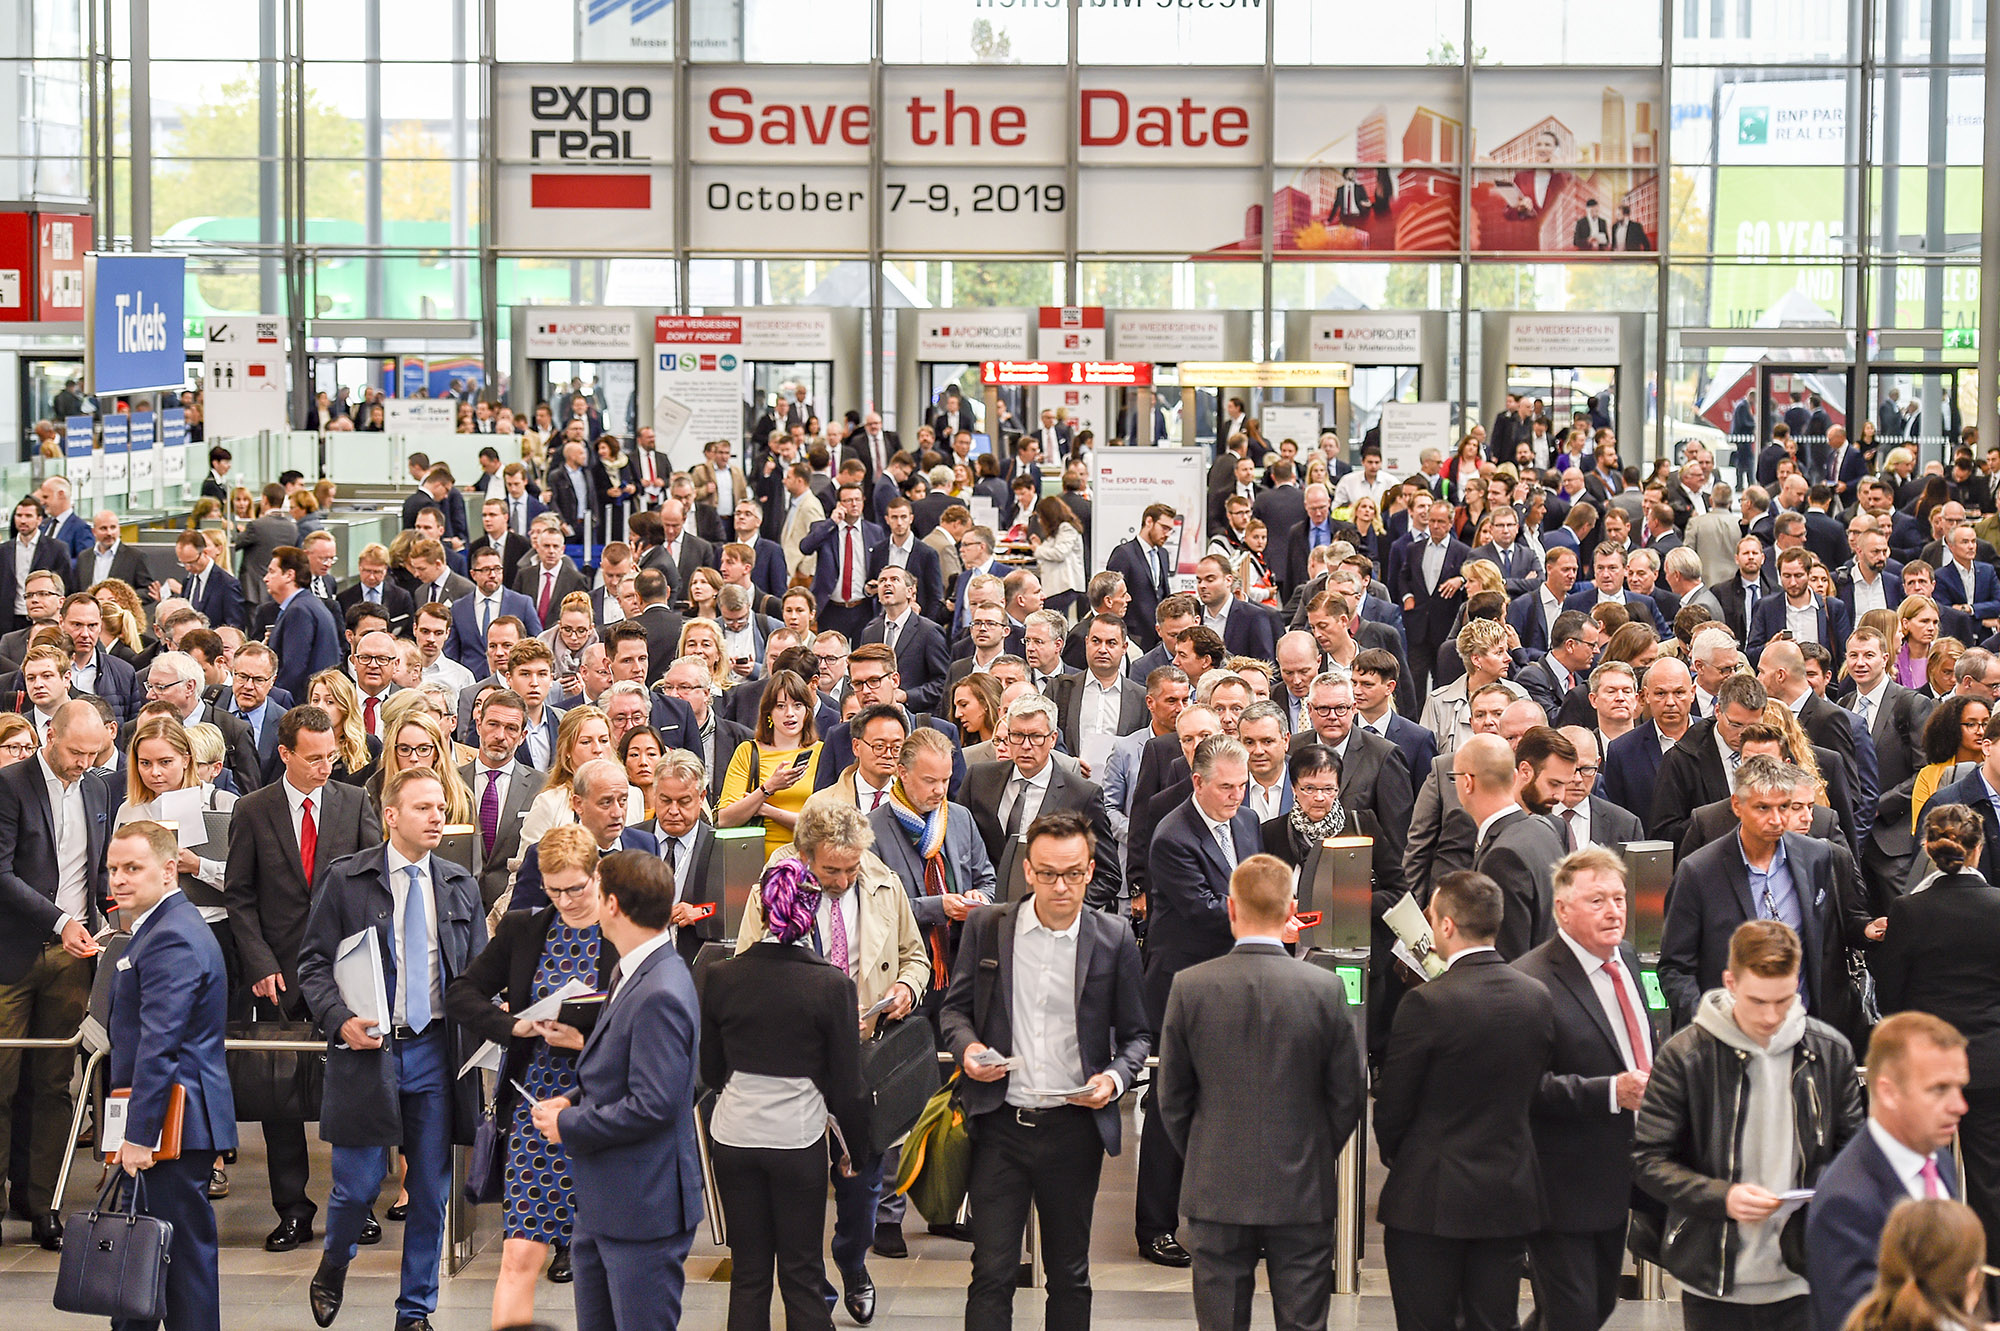 MODESTA REAL ESTATE REPRESENTED AT THE 2018 EXPO REAL IN MUNICH